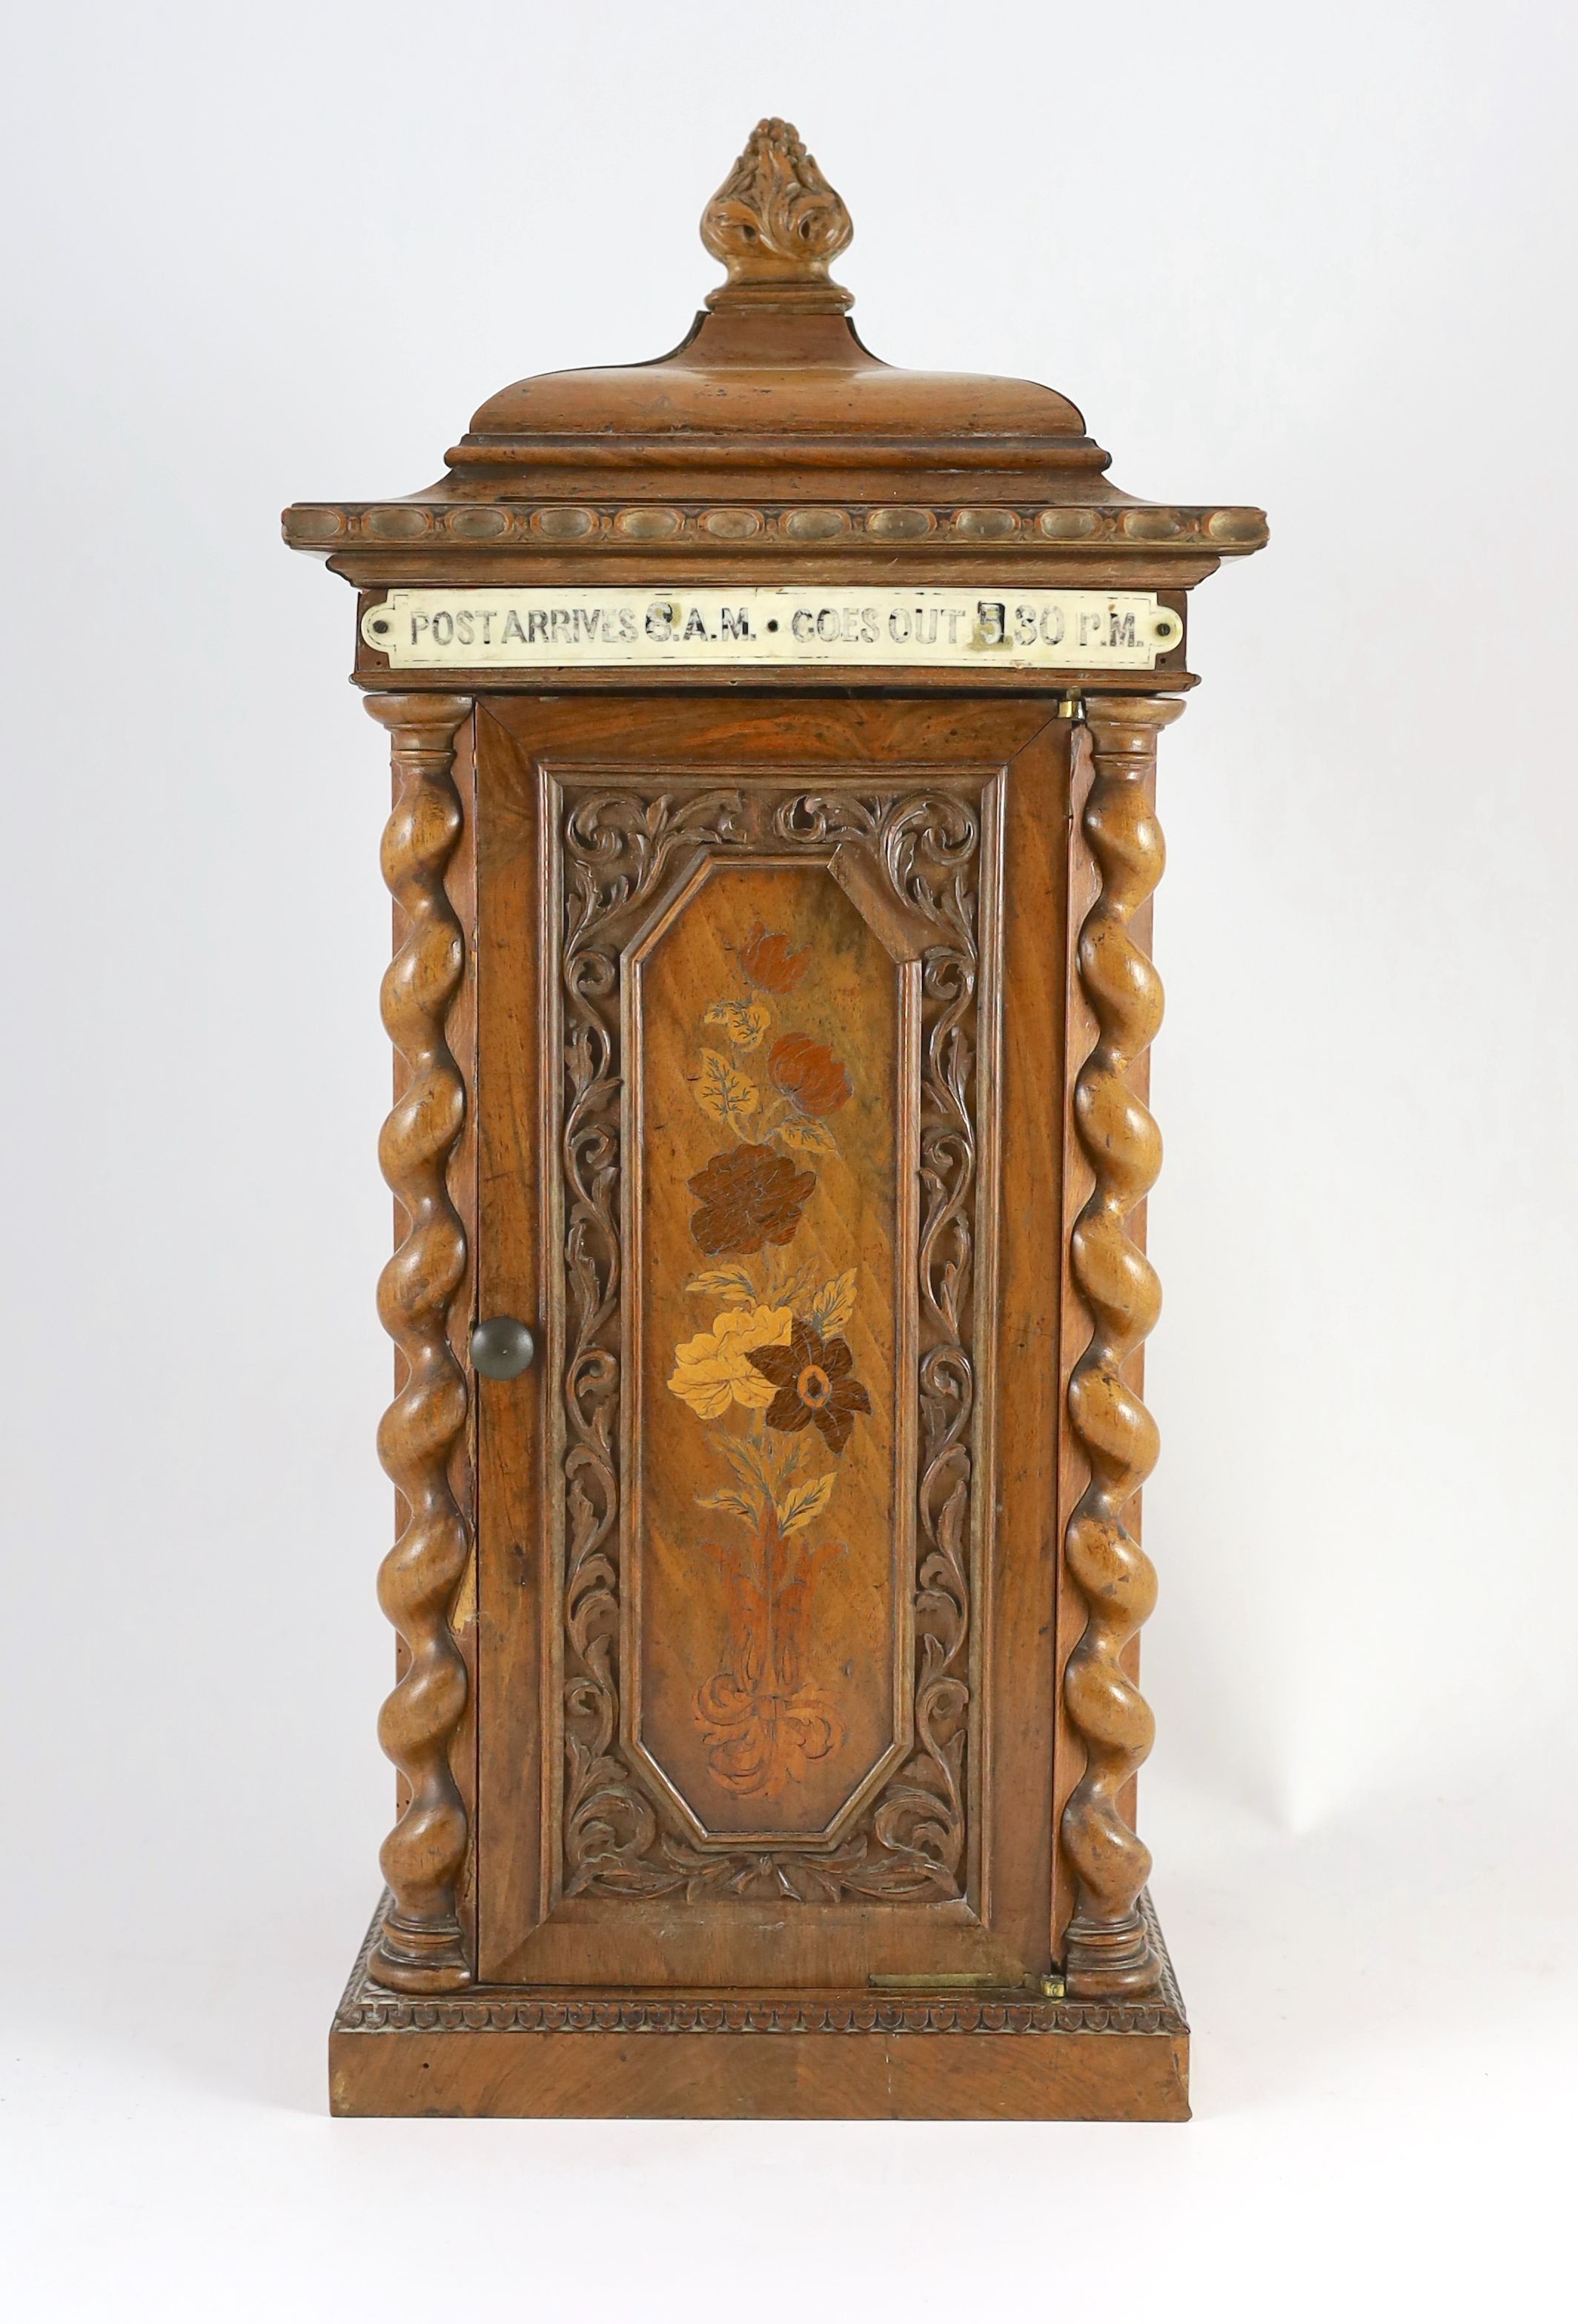 A mid 19th century French marquetry inlaid walnut country house post box-57 cms high. width 26cm depth 24cm height 56cm